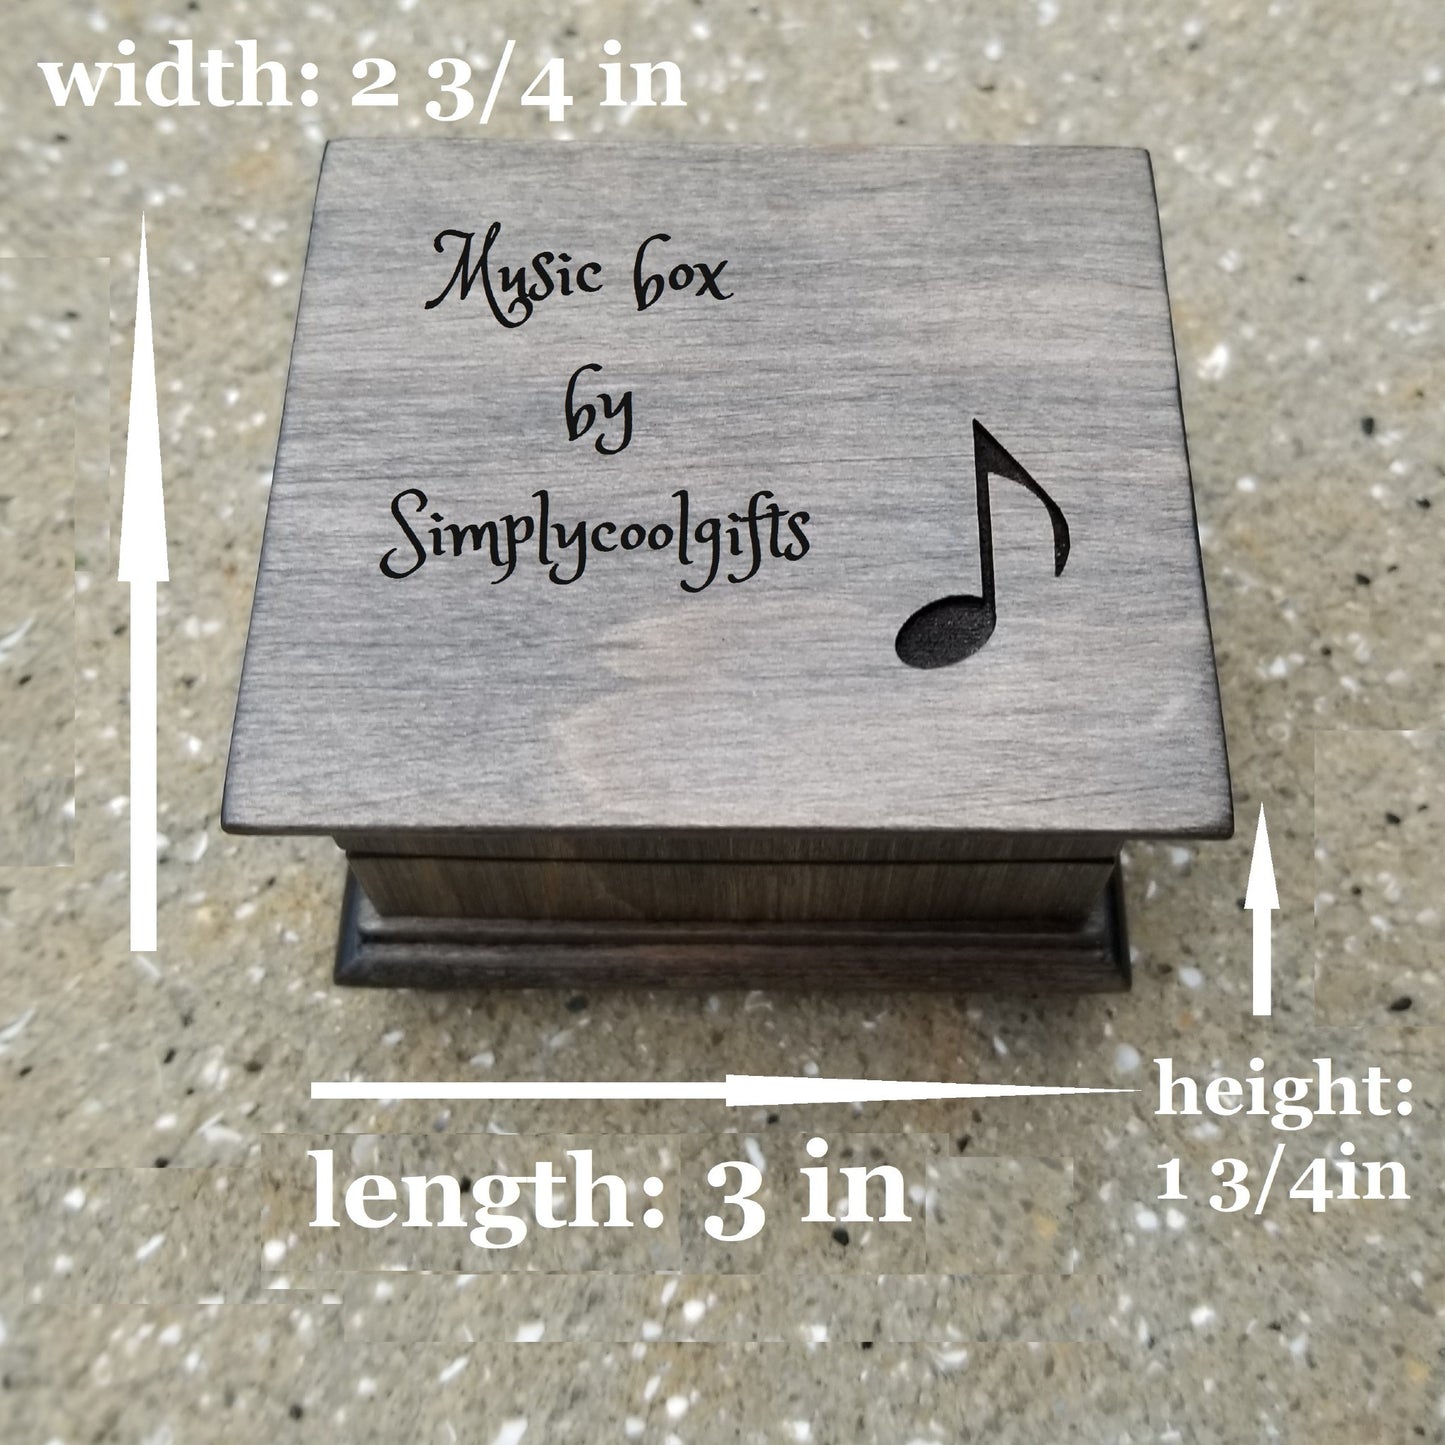 Music box sizing, music box by Simplycoolgifts